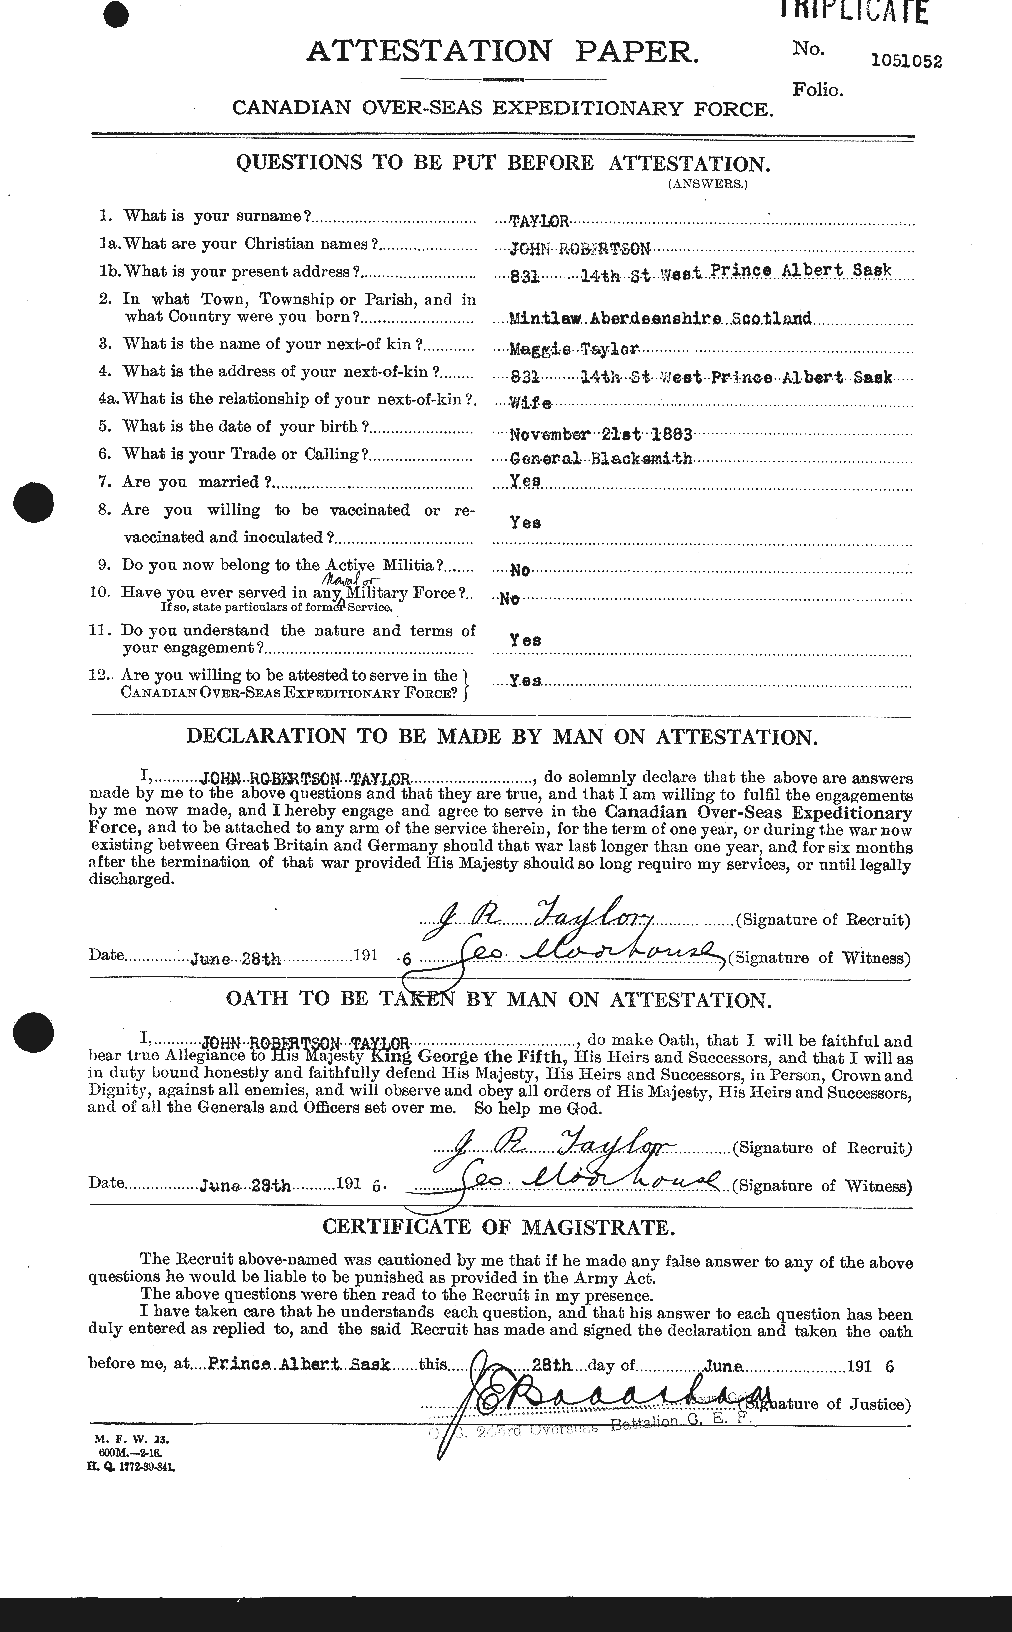 Personnel Records of the First World War - CEF 627133a